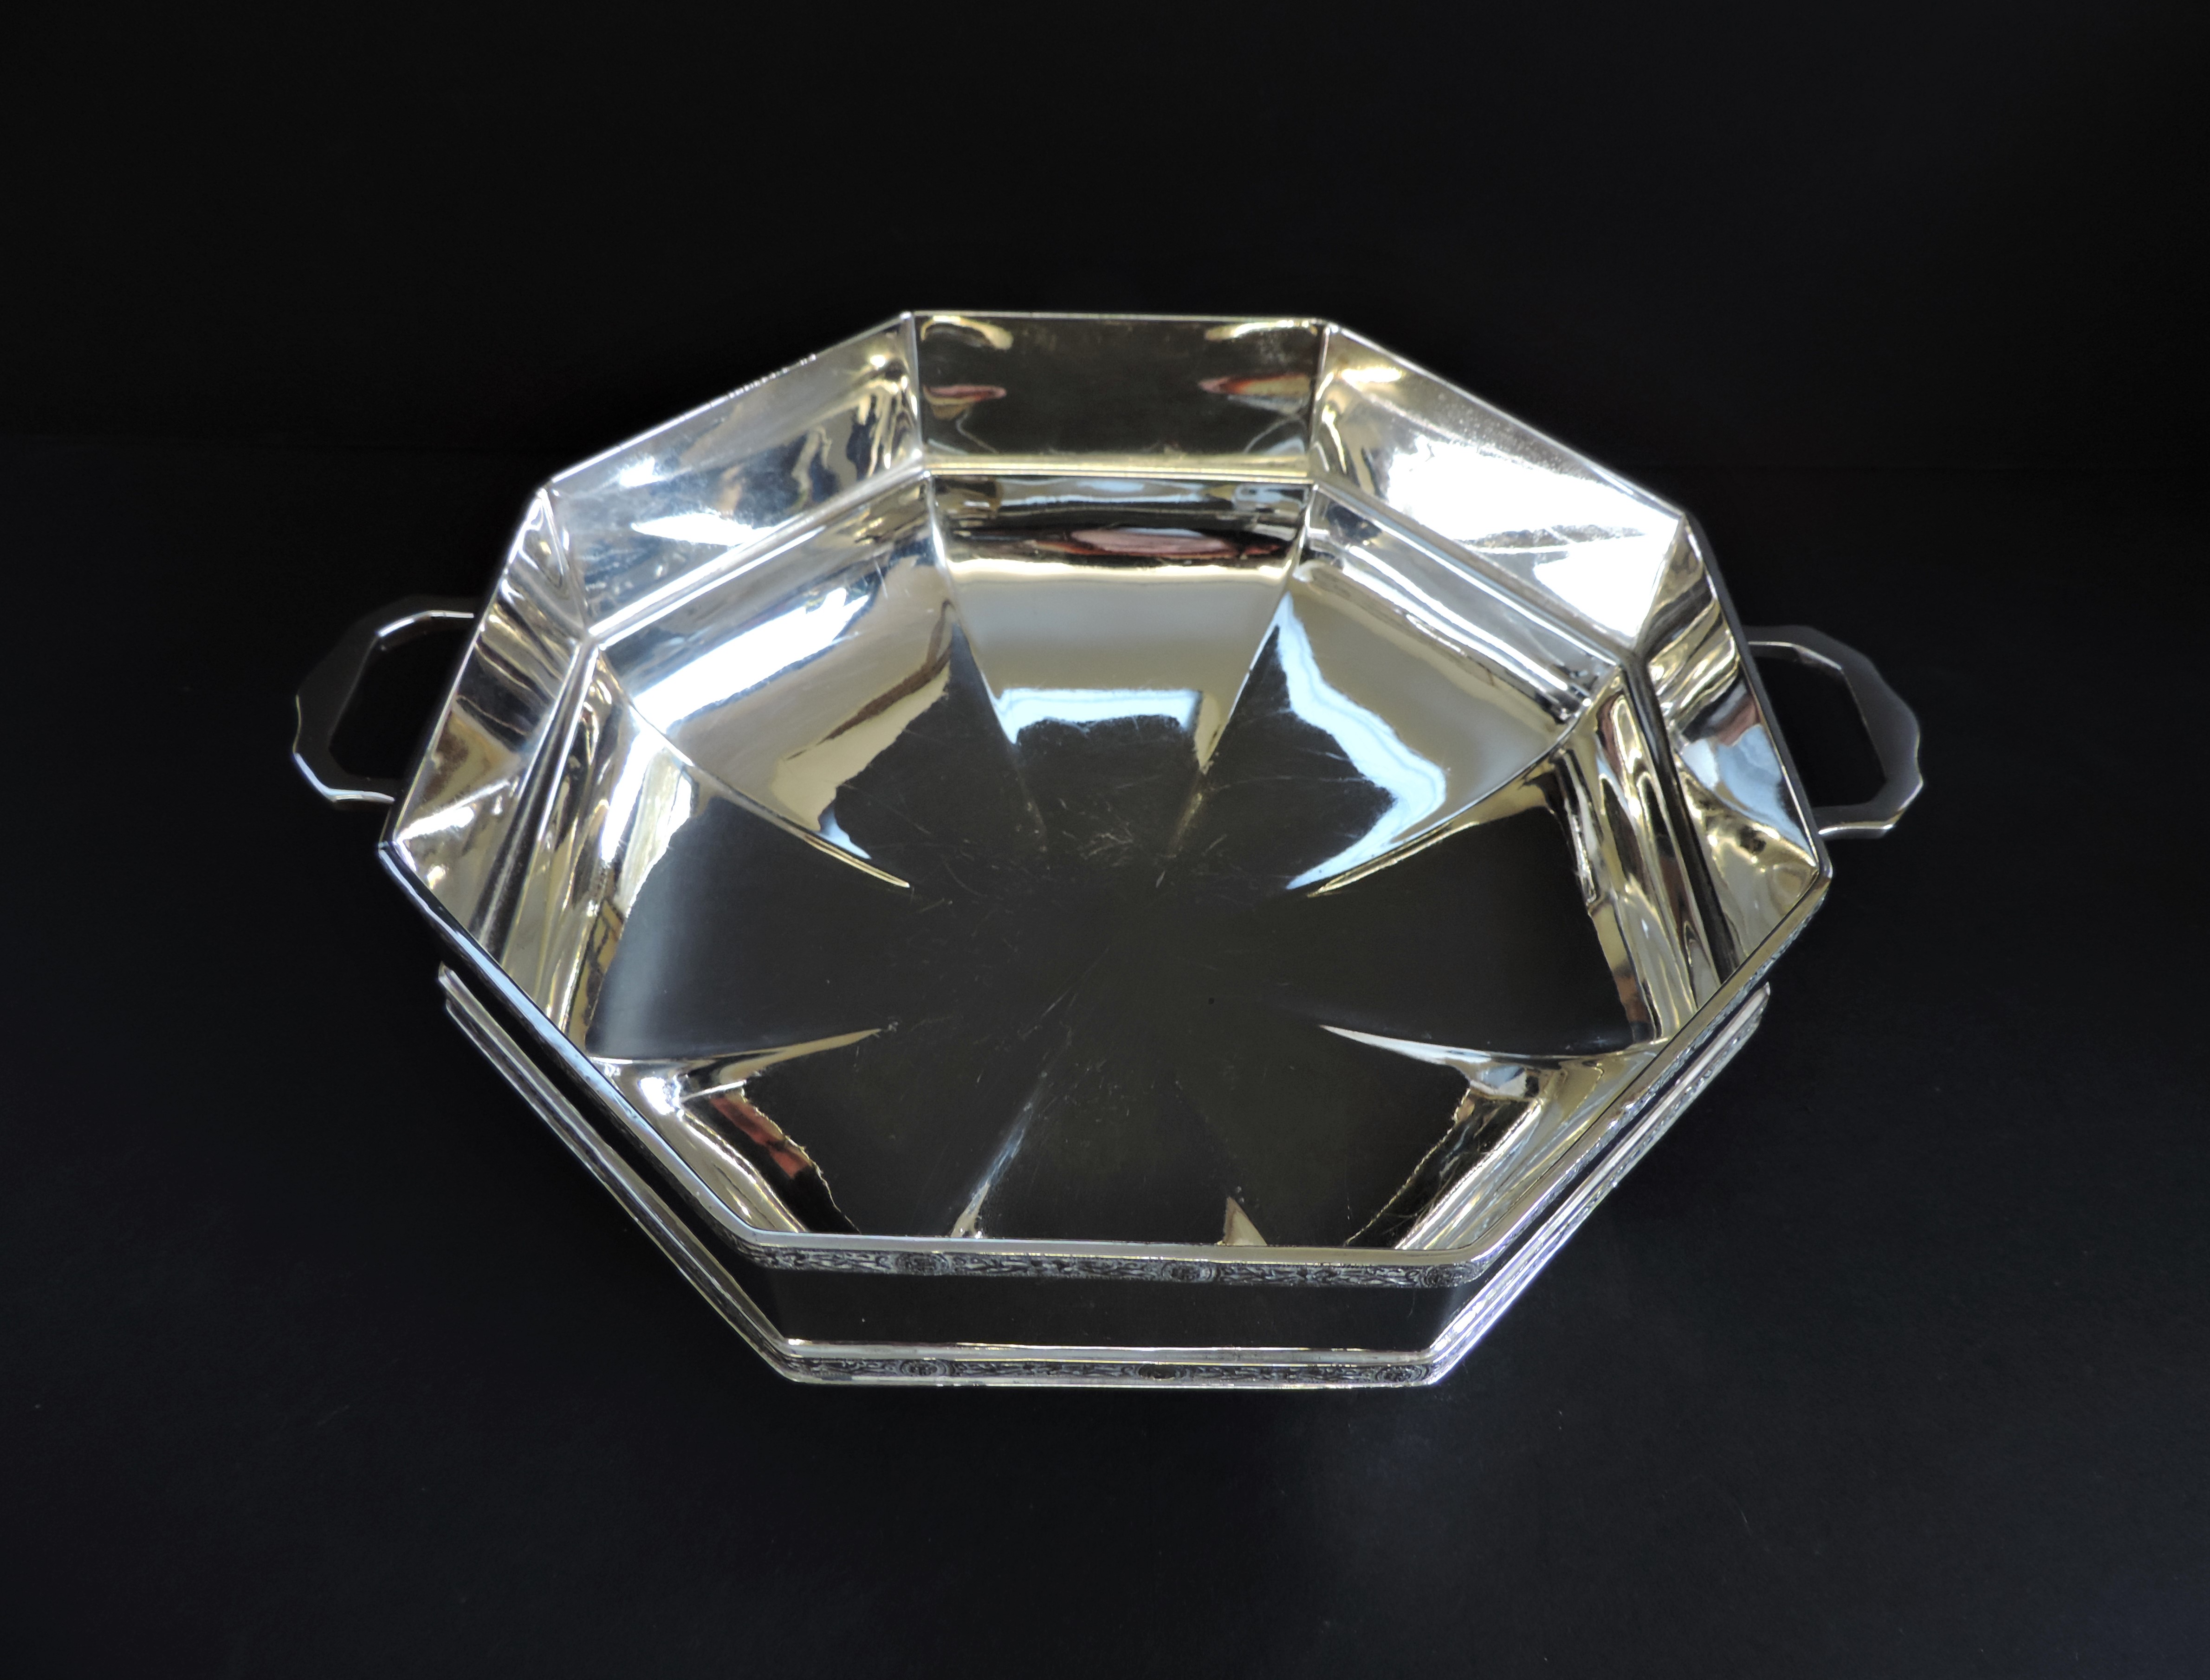 Antique Art Deco Silver Plated Octagonal Bowl 30cm Wide - Image 4 of 6